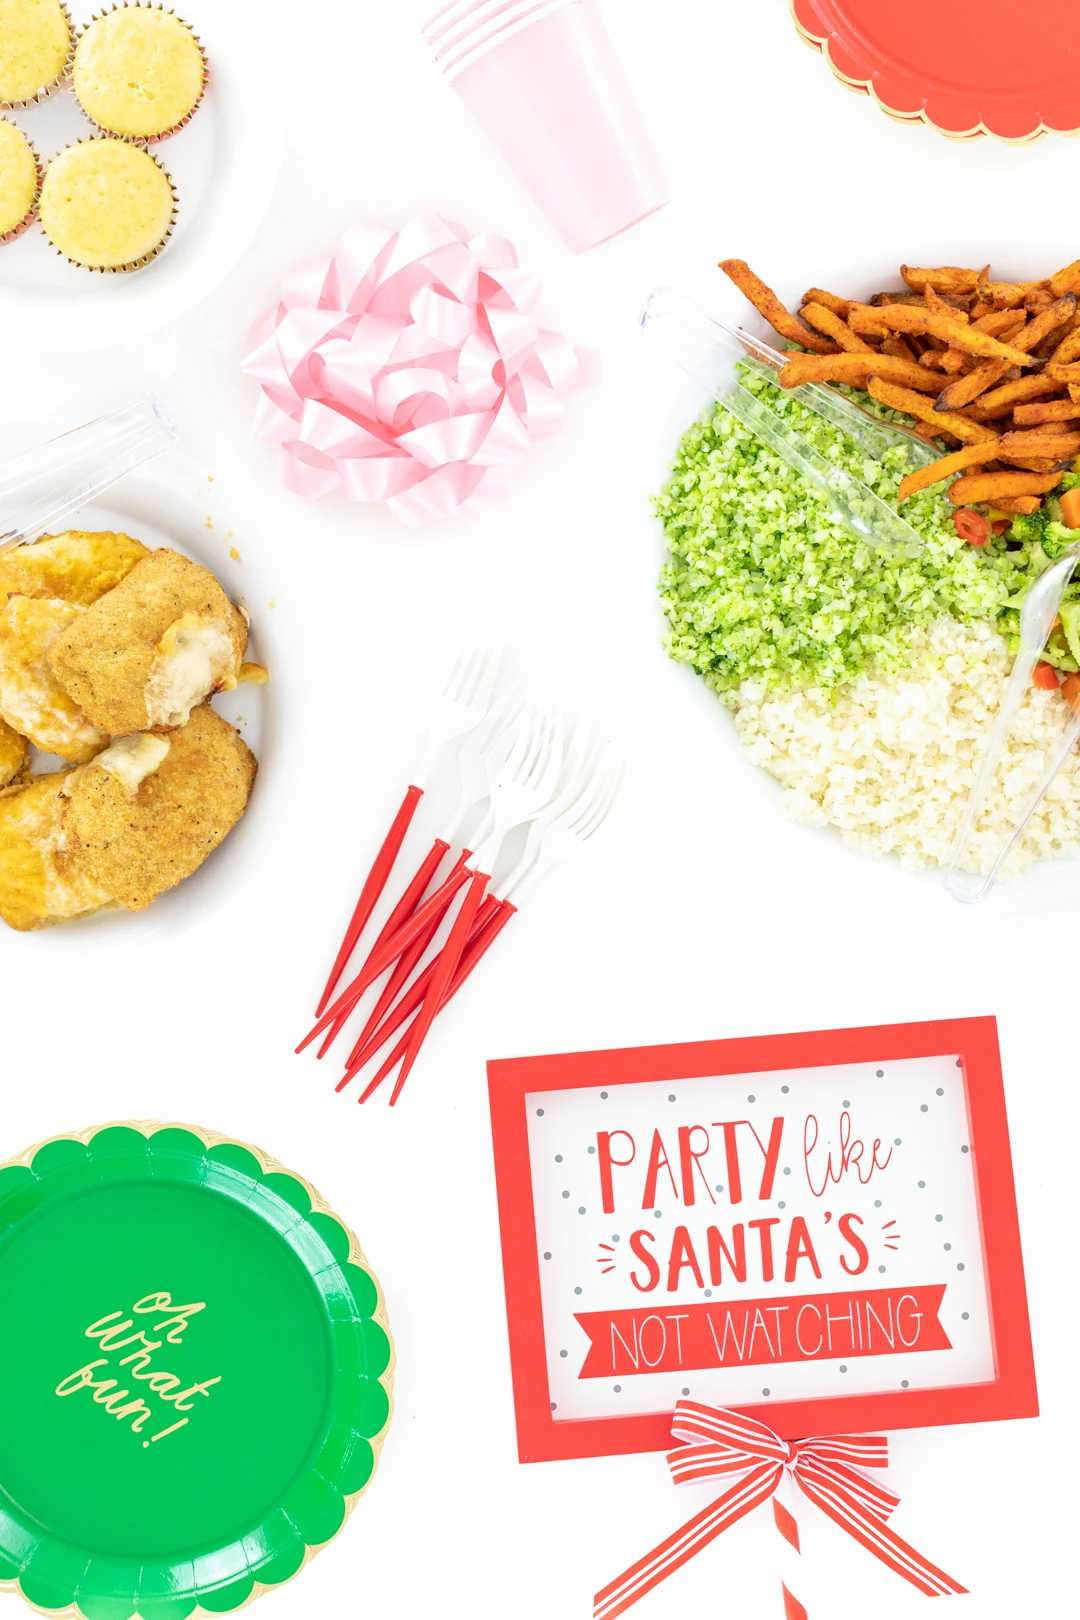 Food spread and Party Like Santa's Not Watching Sign